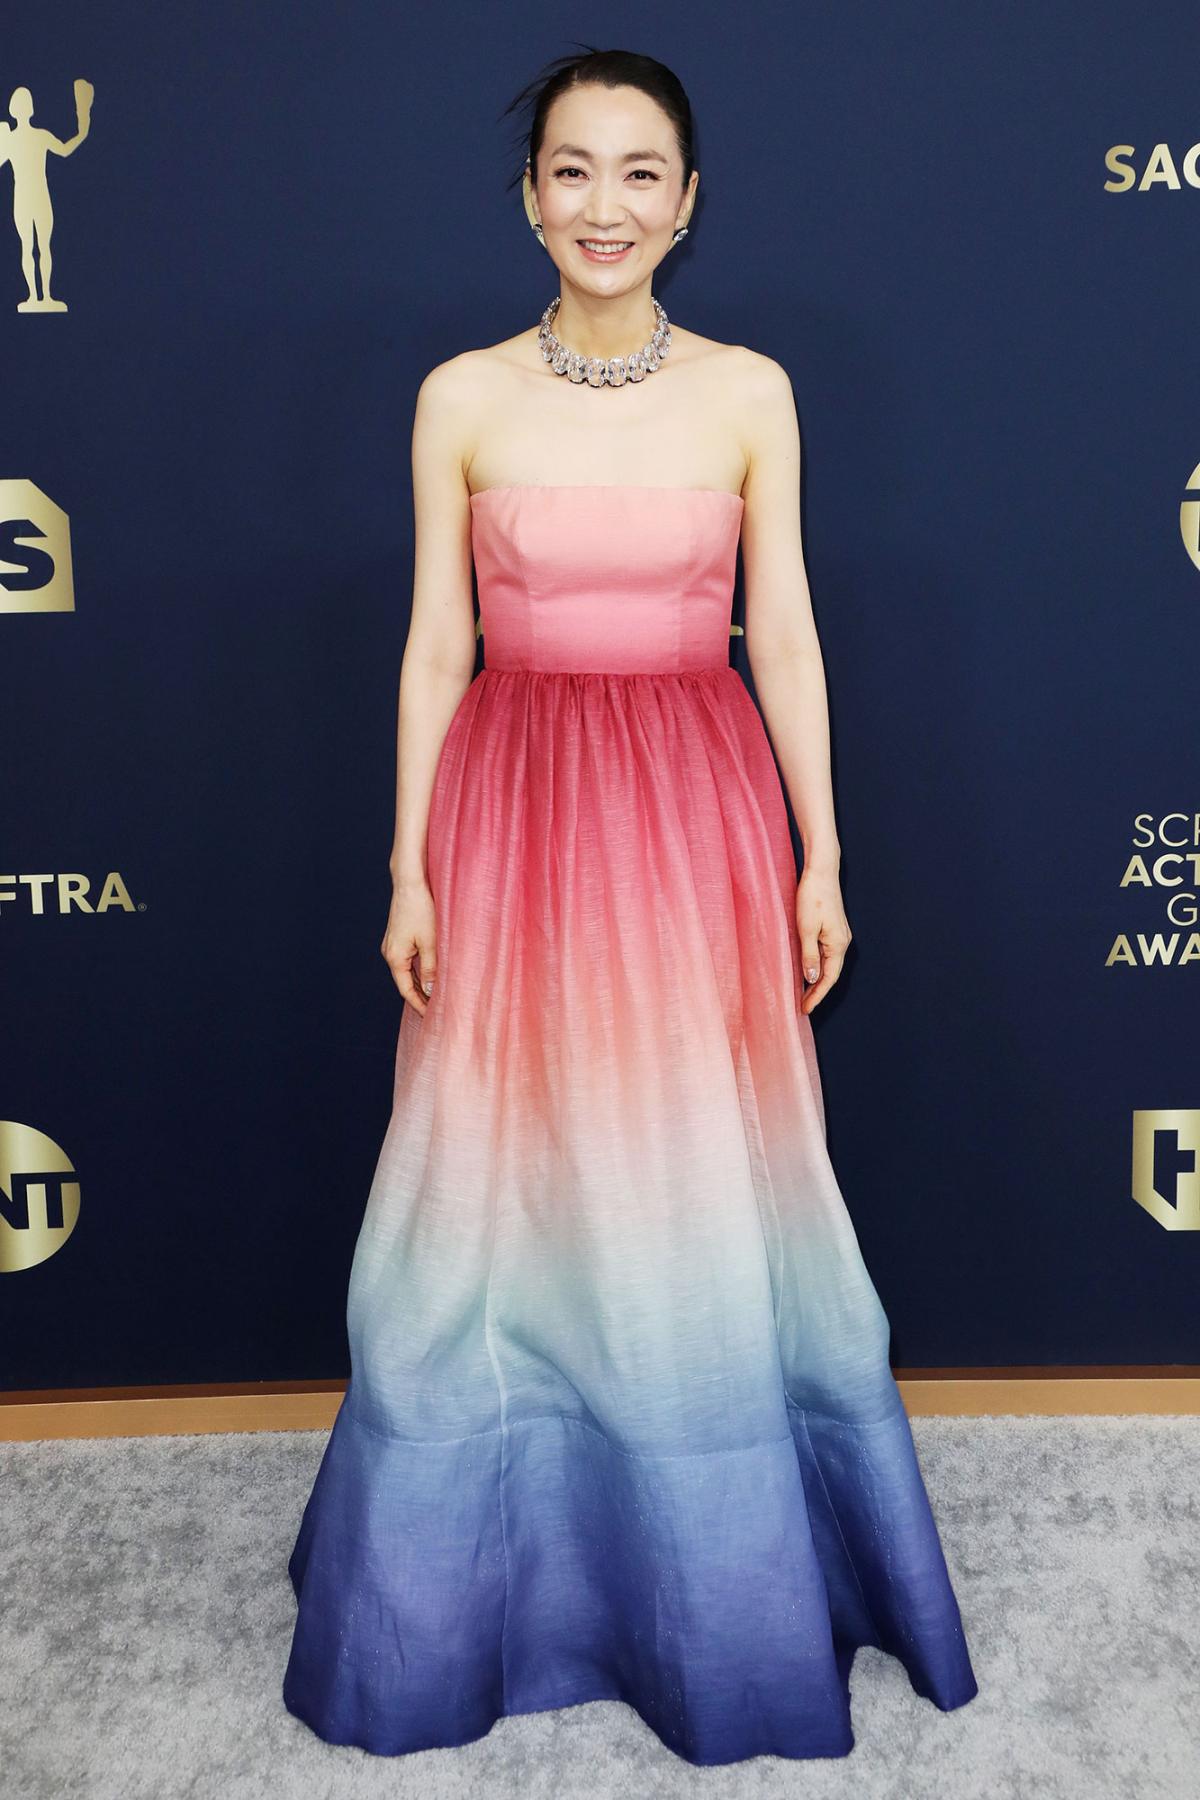 Squid Games' Star HoYeon Jung Dazzles in Crystal Louis Vuitton Gown and  Black Sandals at the 2022 SAG Awards